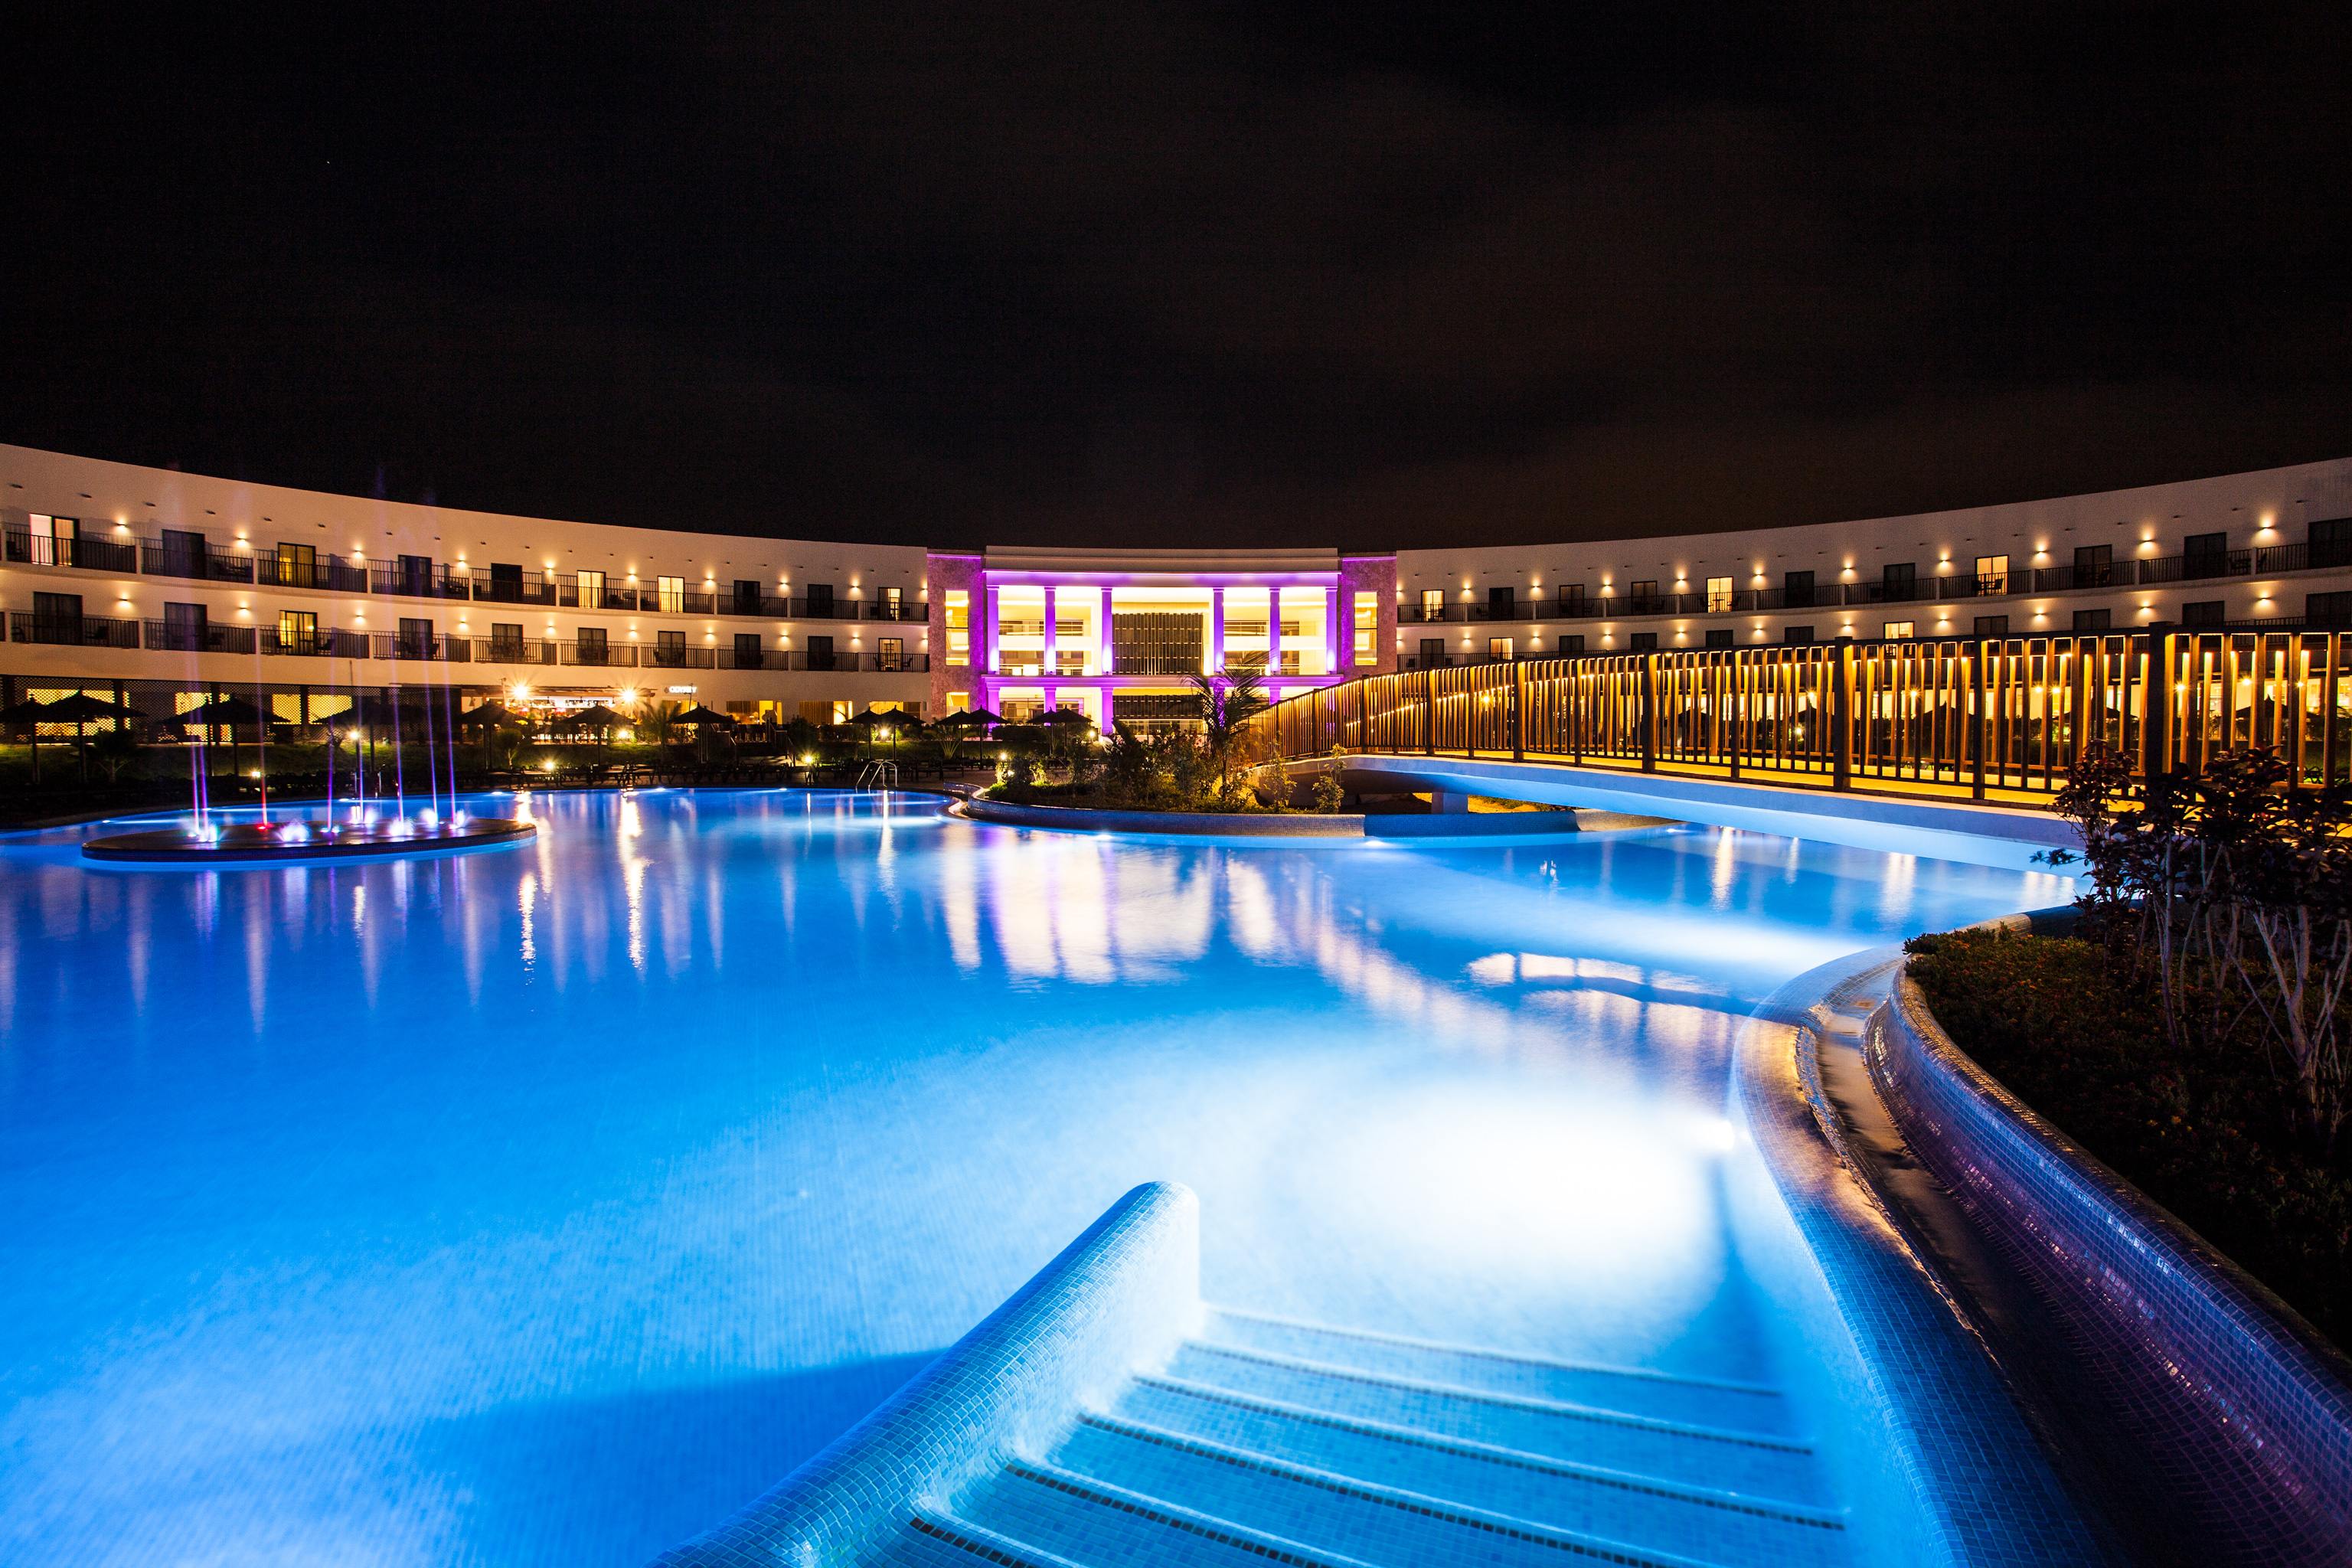 The pool and resort at night